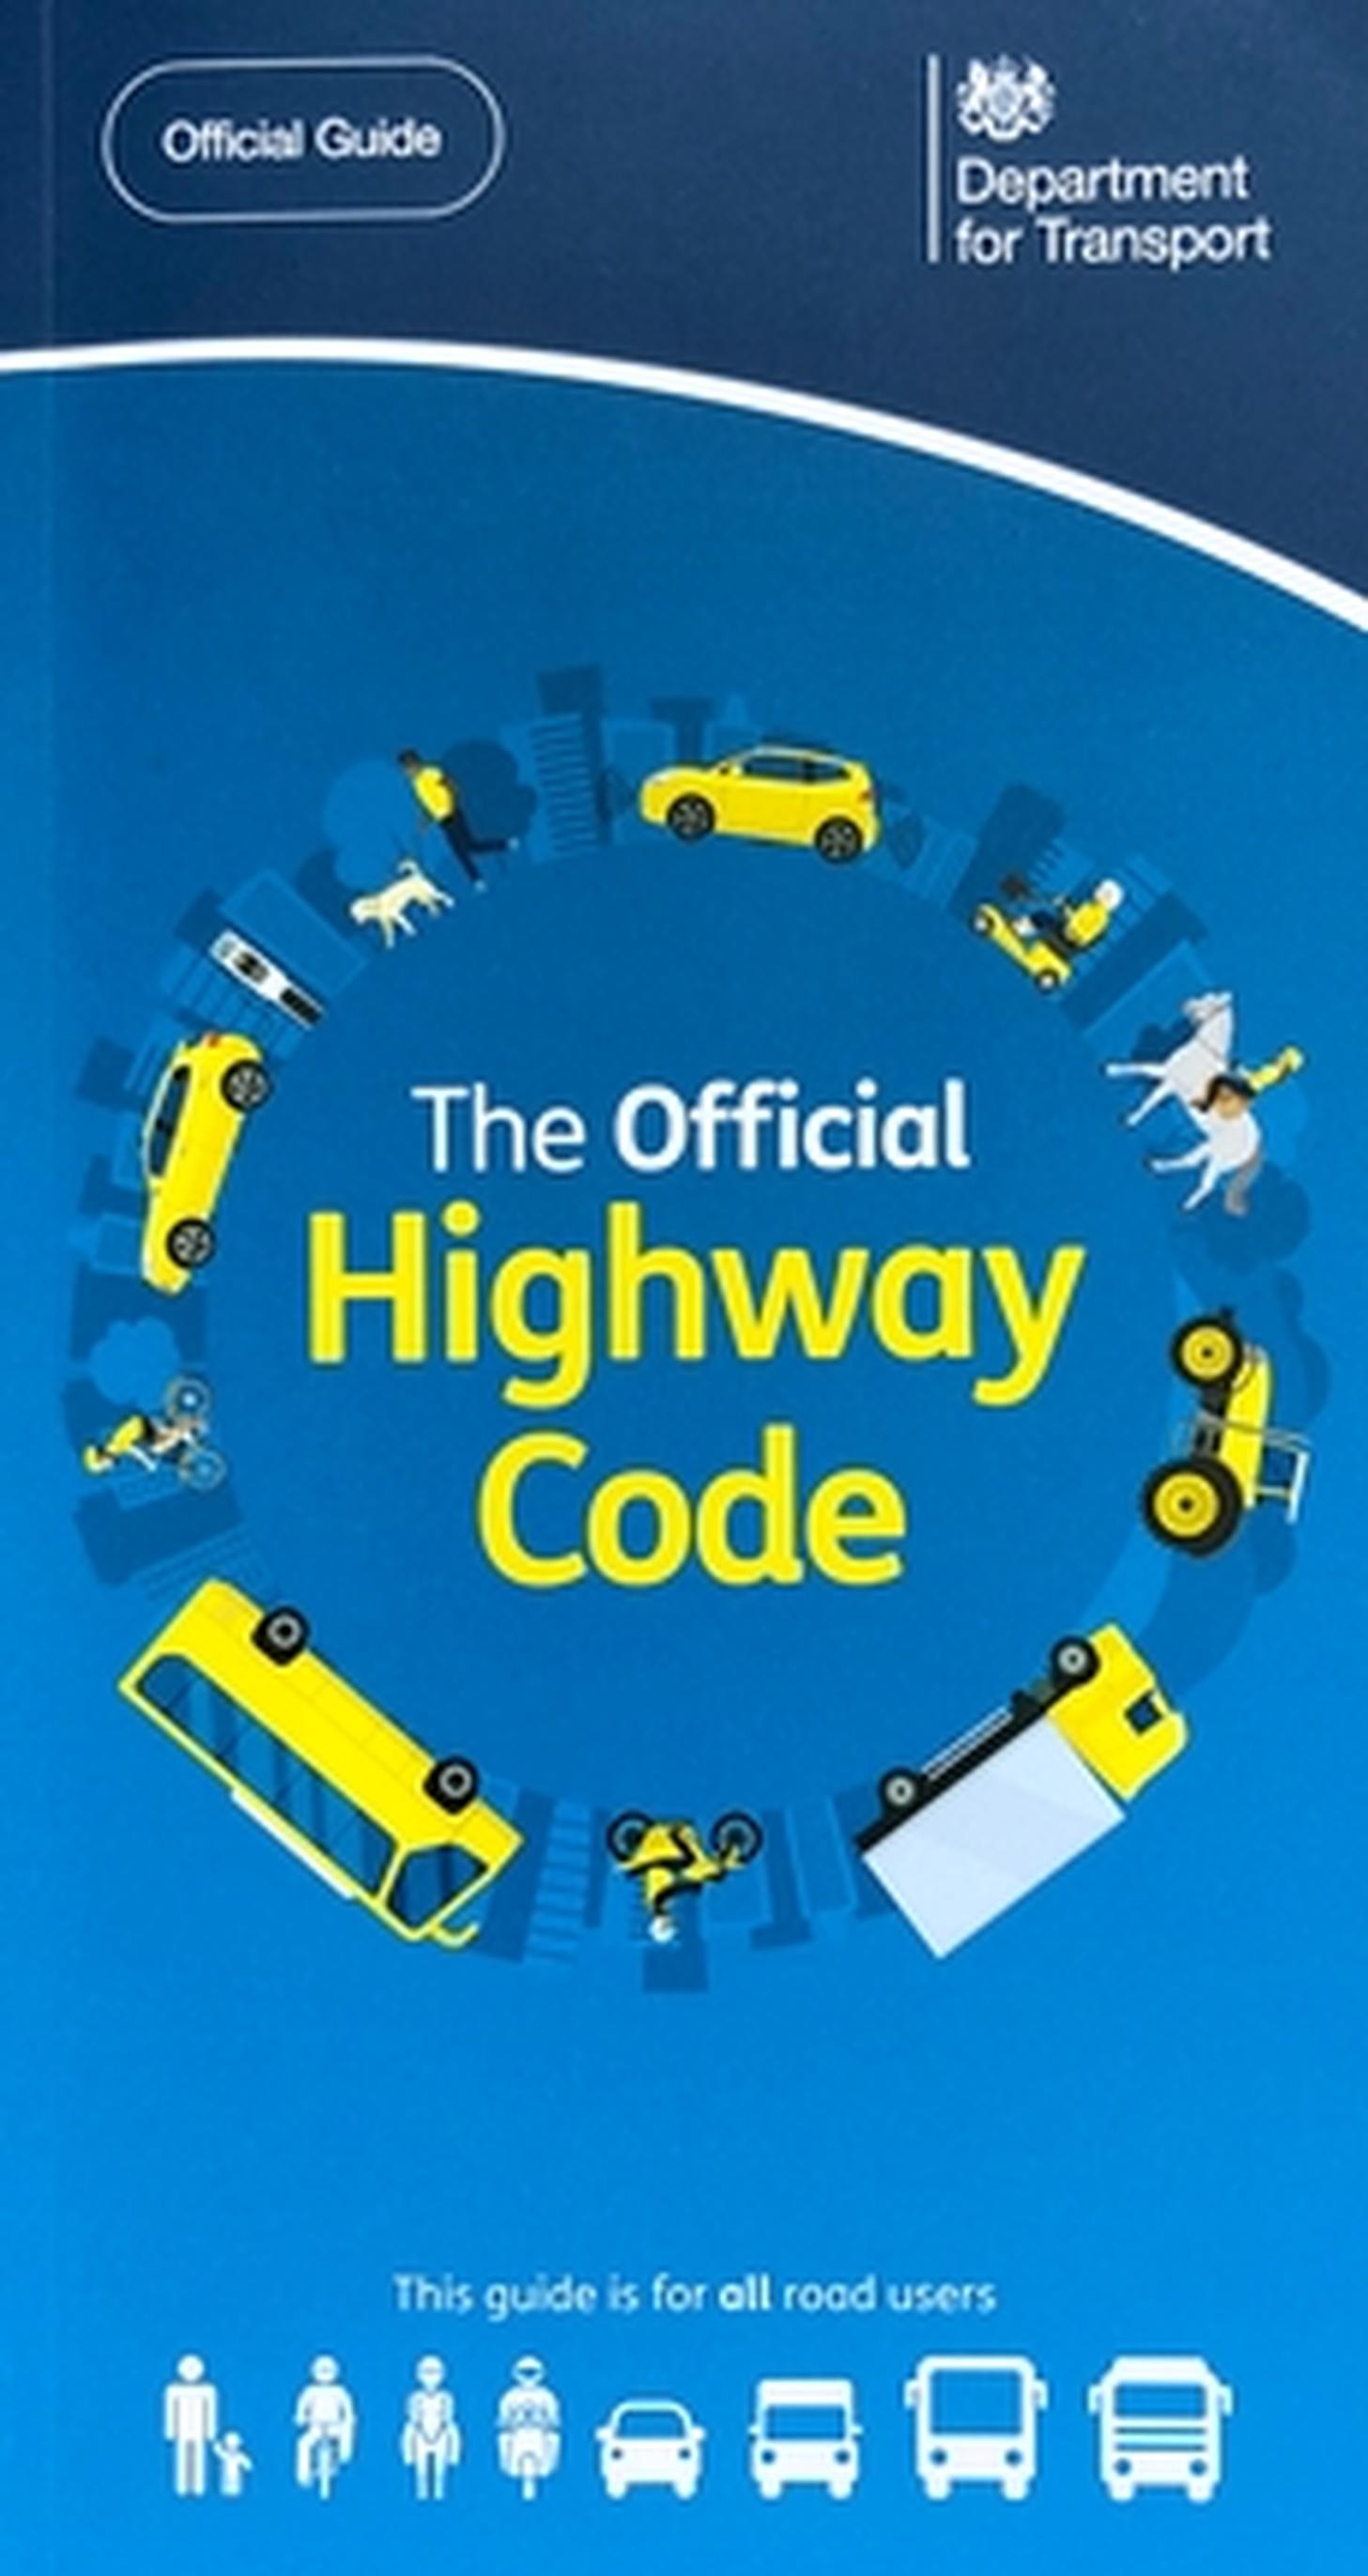 Half of drivers unsure about new Highway Code rules